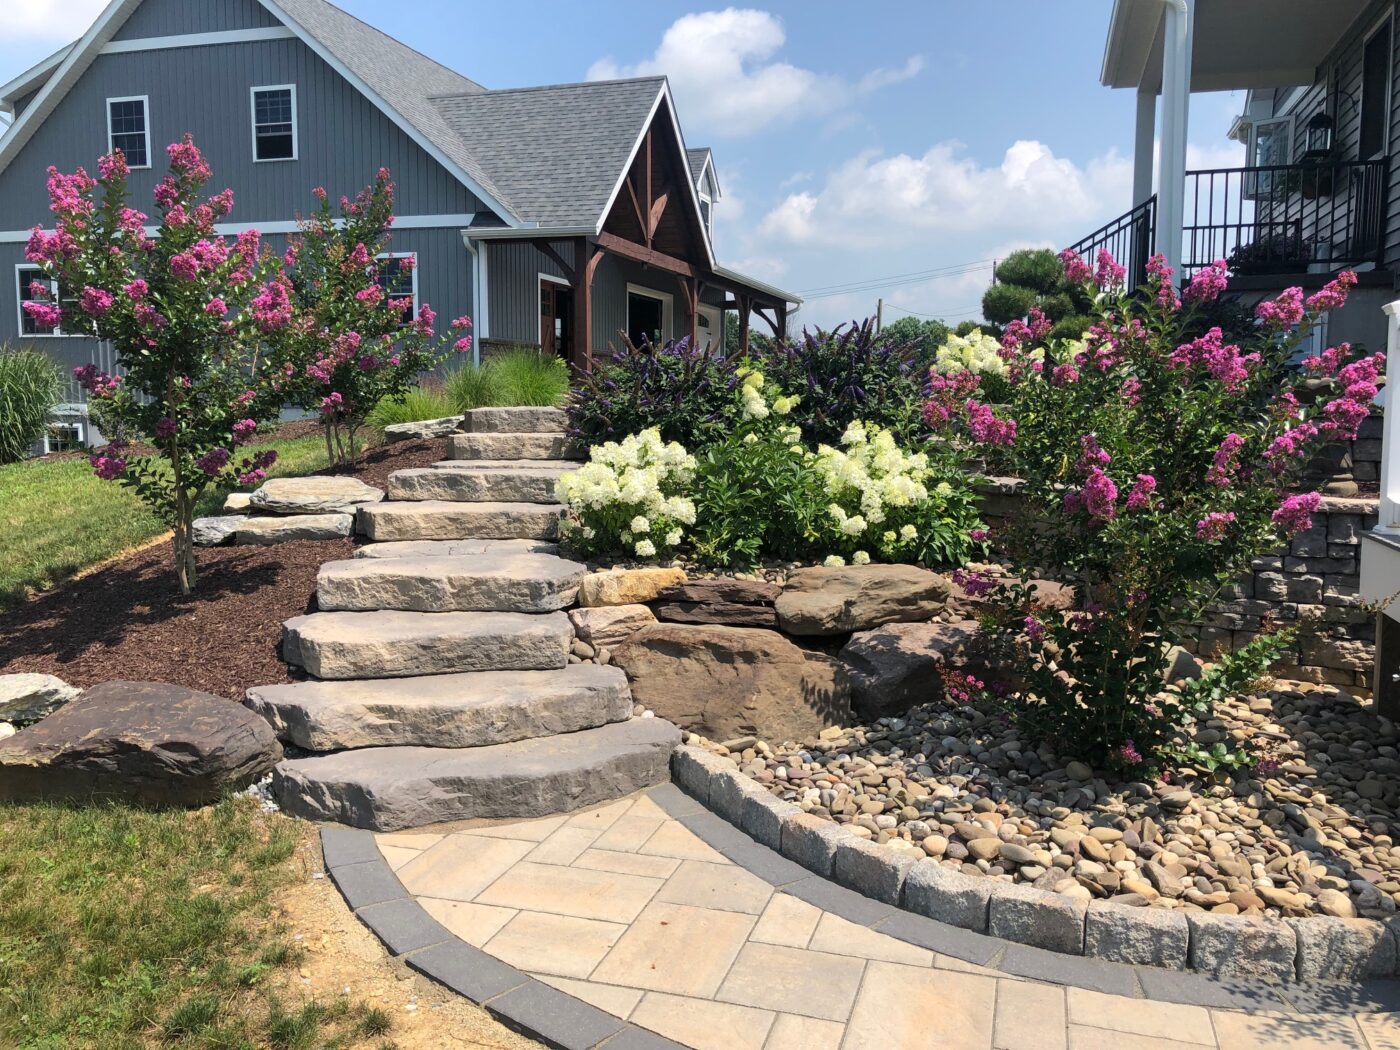 beautiful hardscape steps and patio walkway by backyard living in strasburg